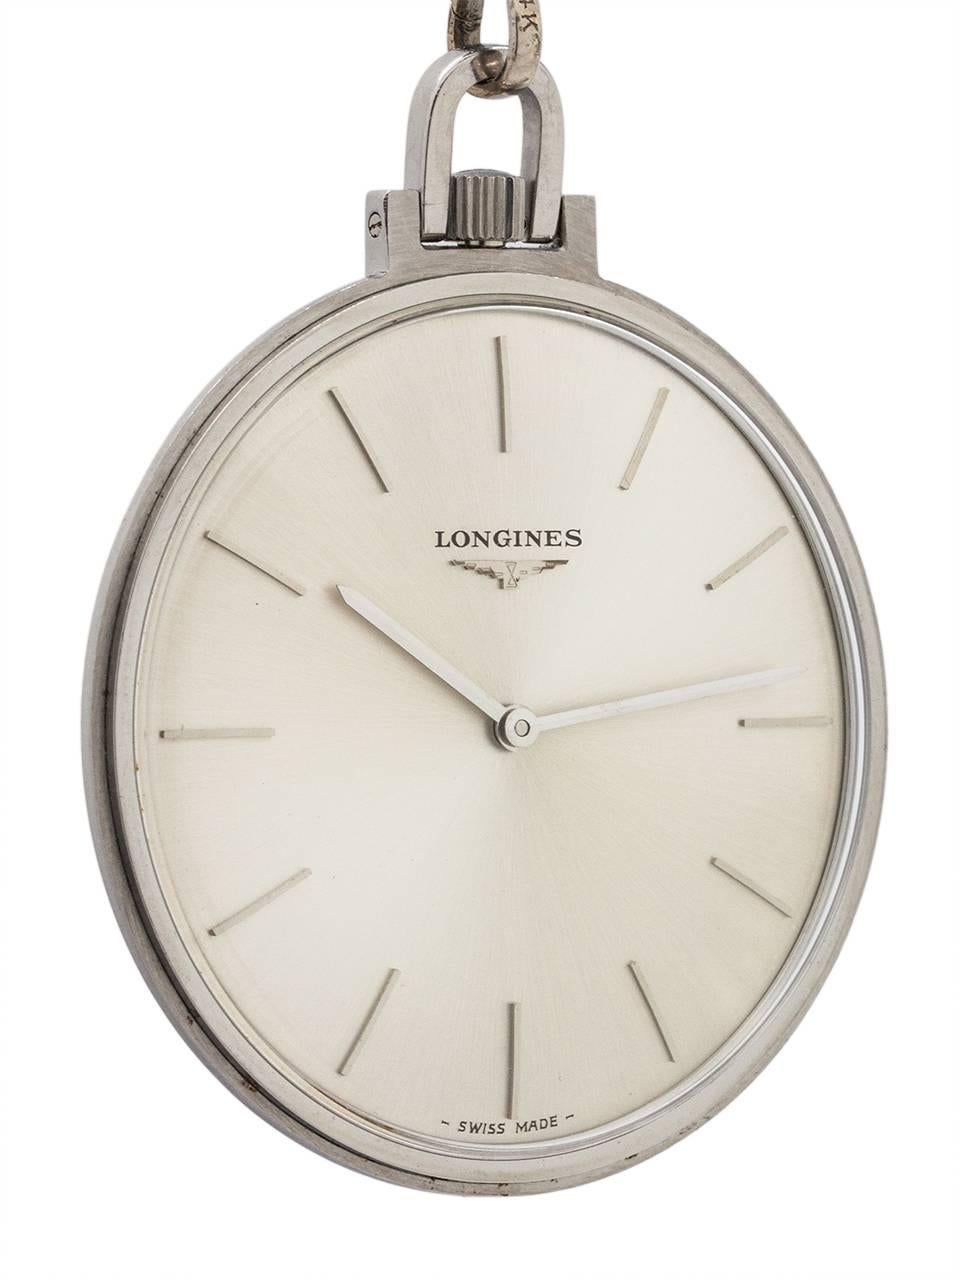 
Vintage Longines man’s pocket watch circa 1960’s. Featuring a 40.5mm diameter open face “modernist” design stainless steel case with stylized U shaped bow, and very minty condition original silvered satin dial with minimalist stick indexes and